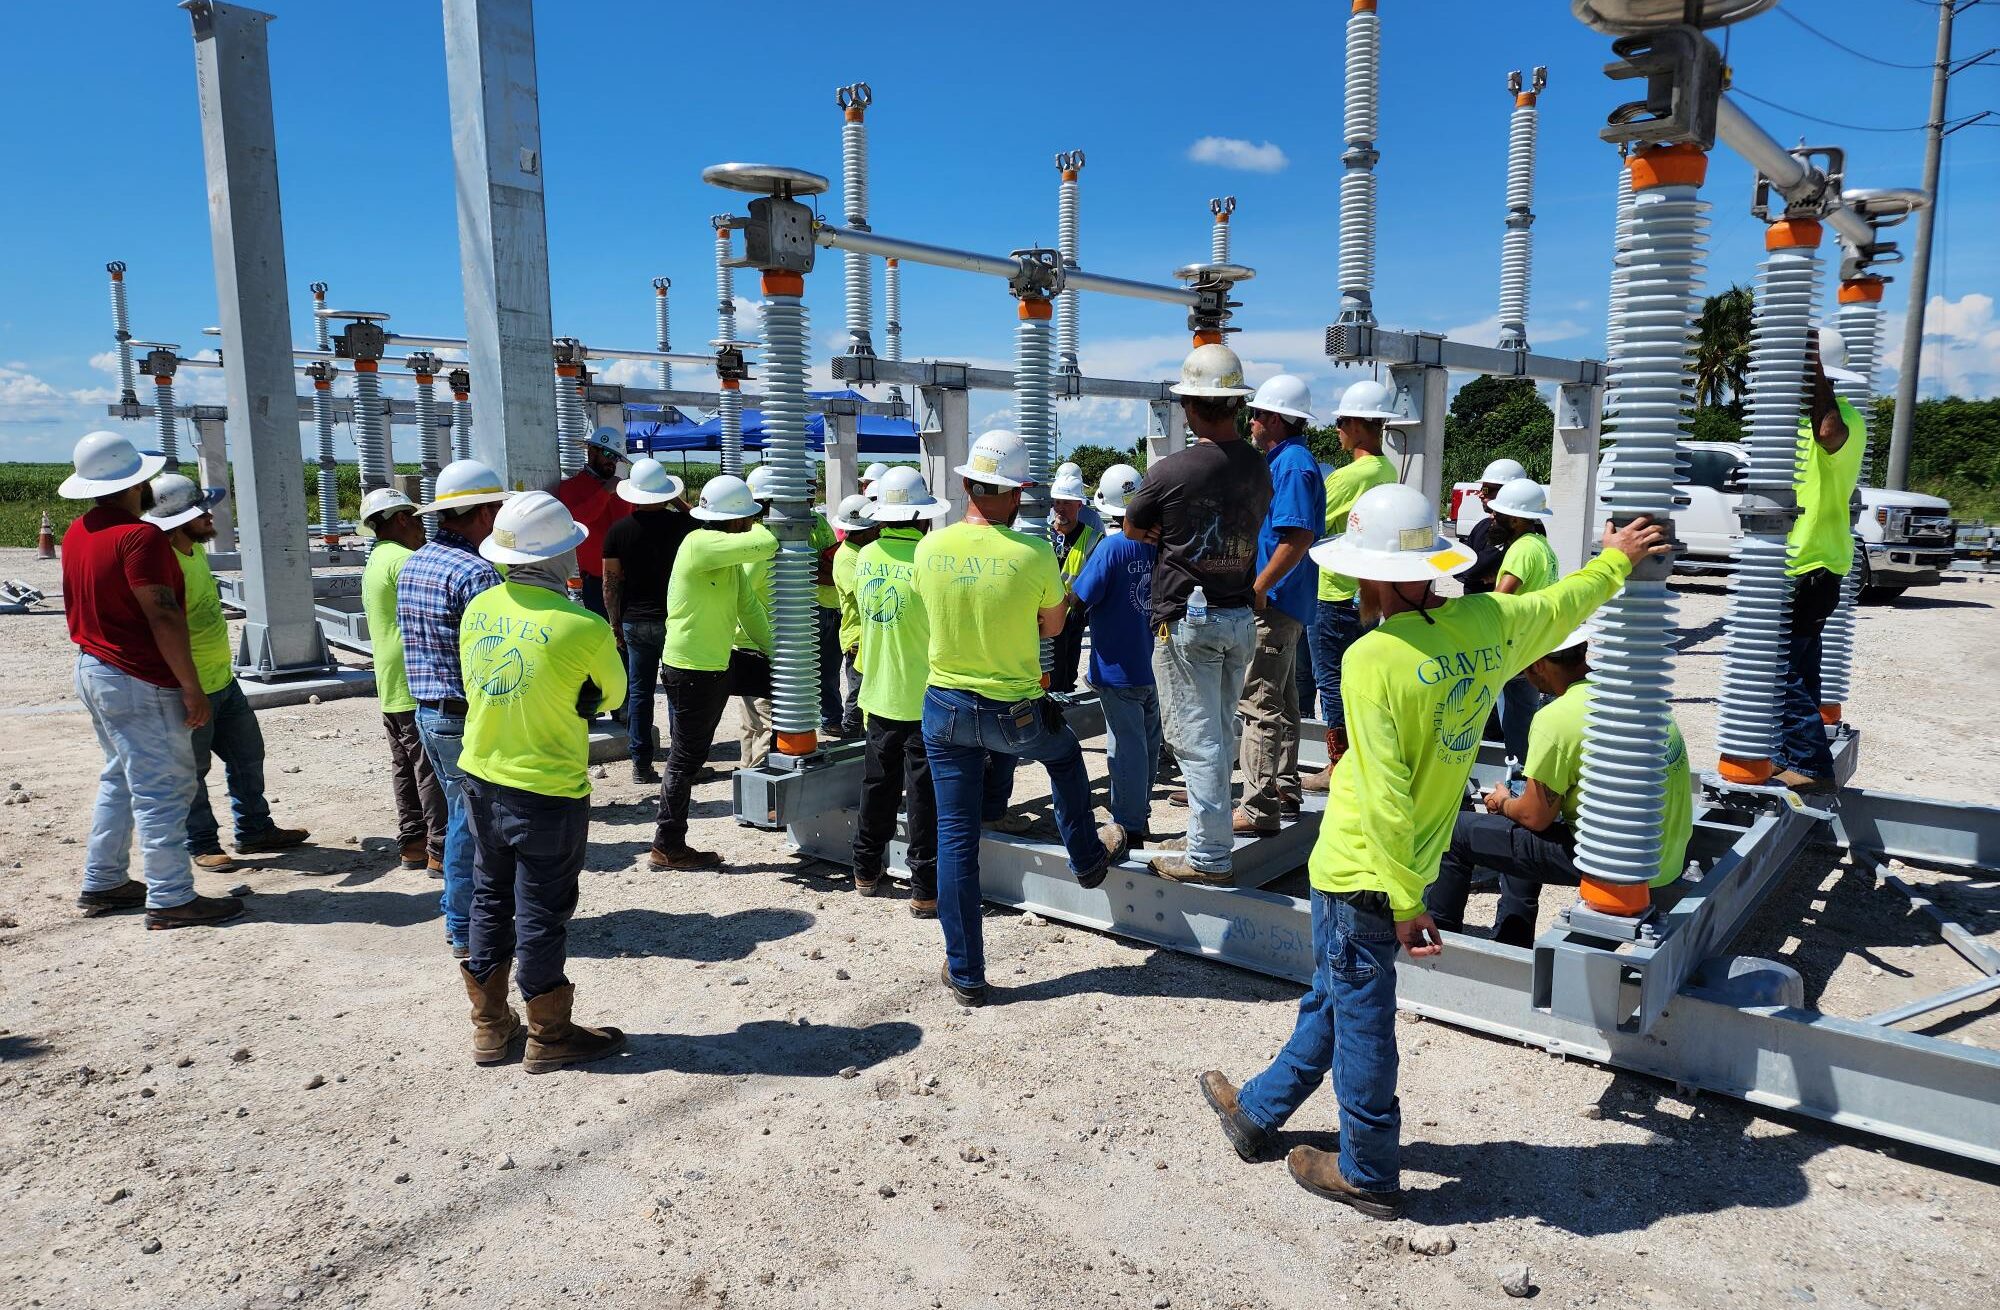 Graves Electrical Services and Pascor Atlantic perform switch training at Southbay substation